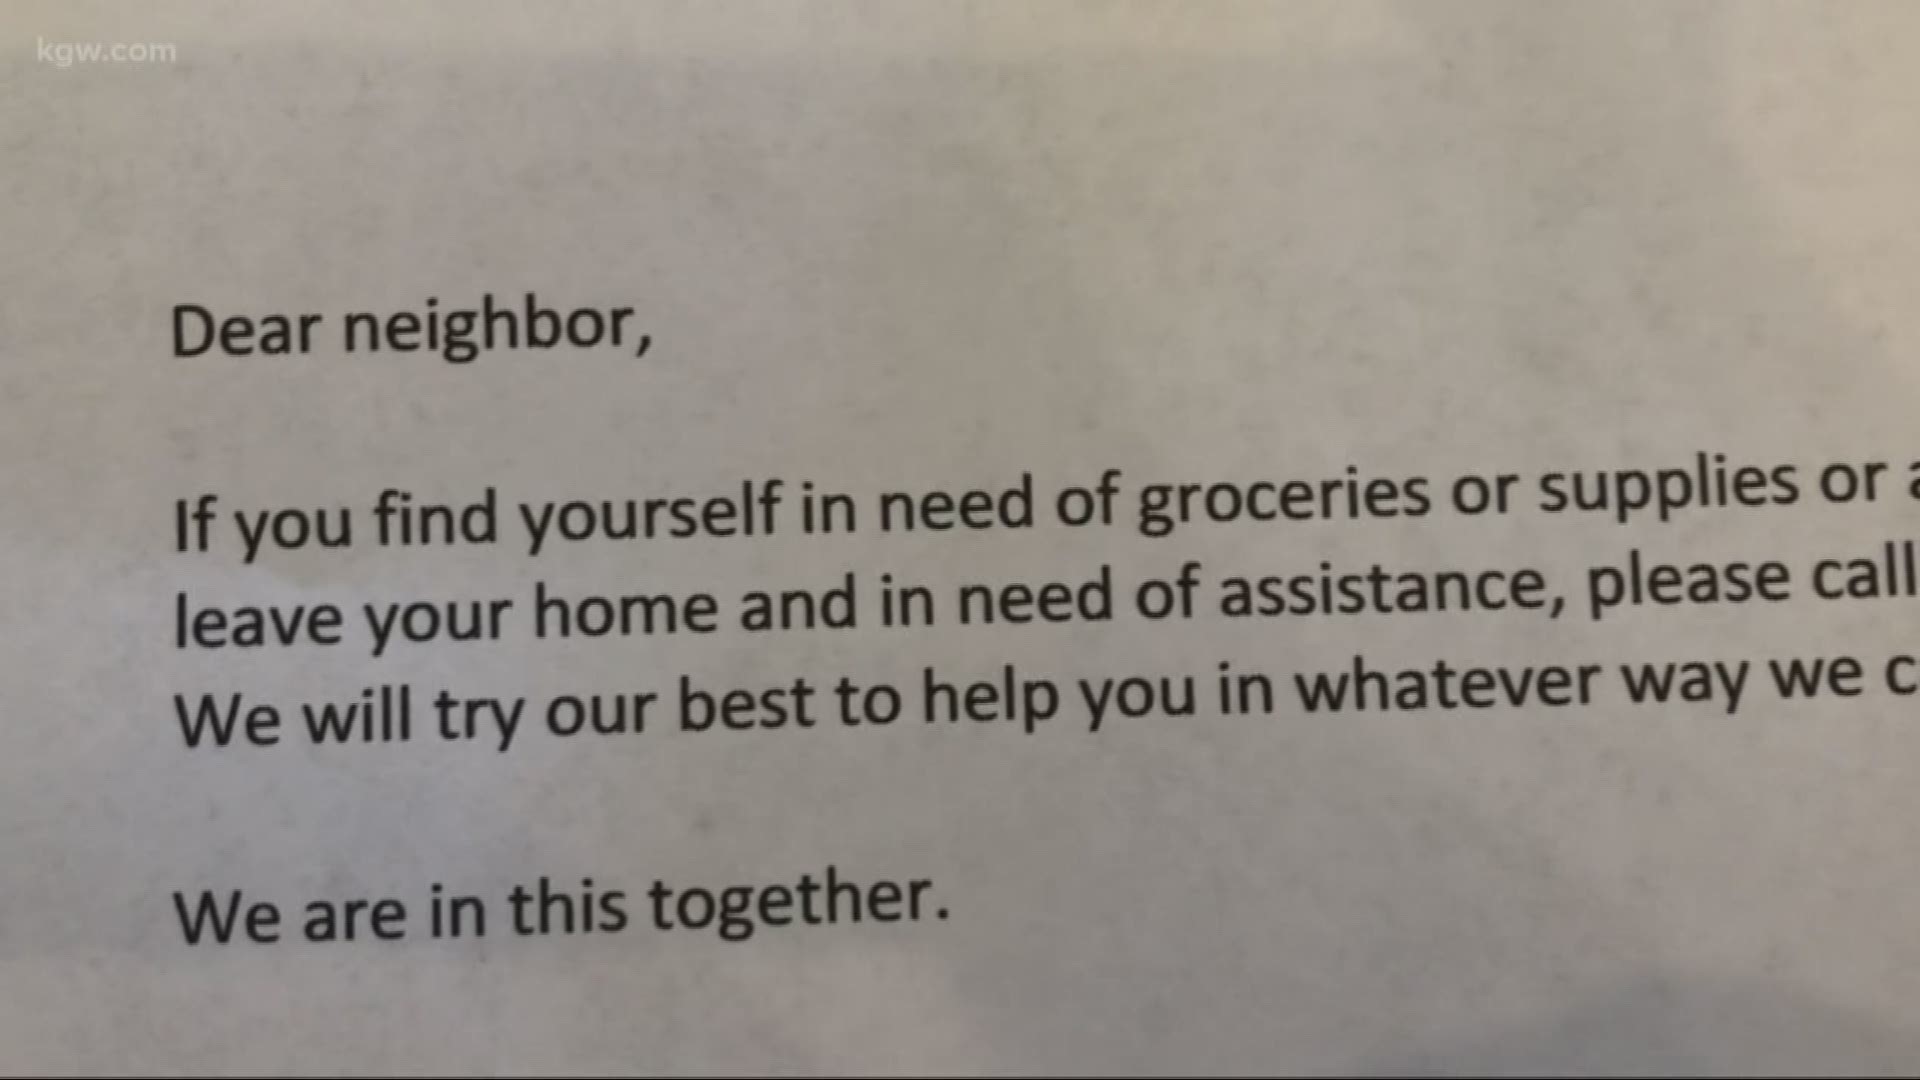 More than ever, it's important to check in on your neighbors and people who live along. KGW's Ashley Korslien has an idea about how you can safely do your part.